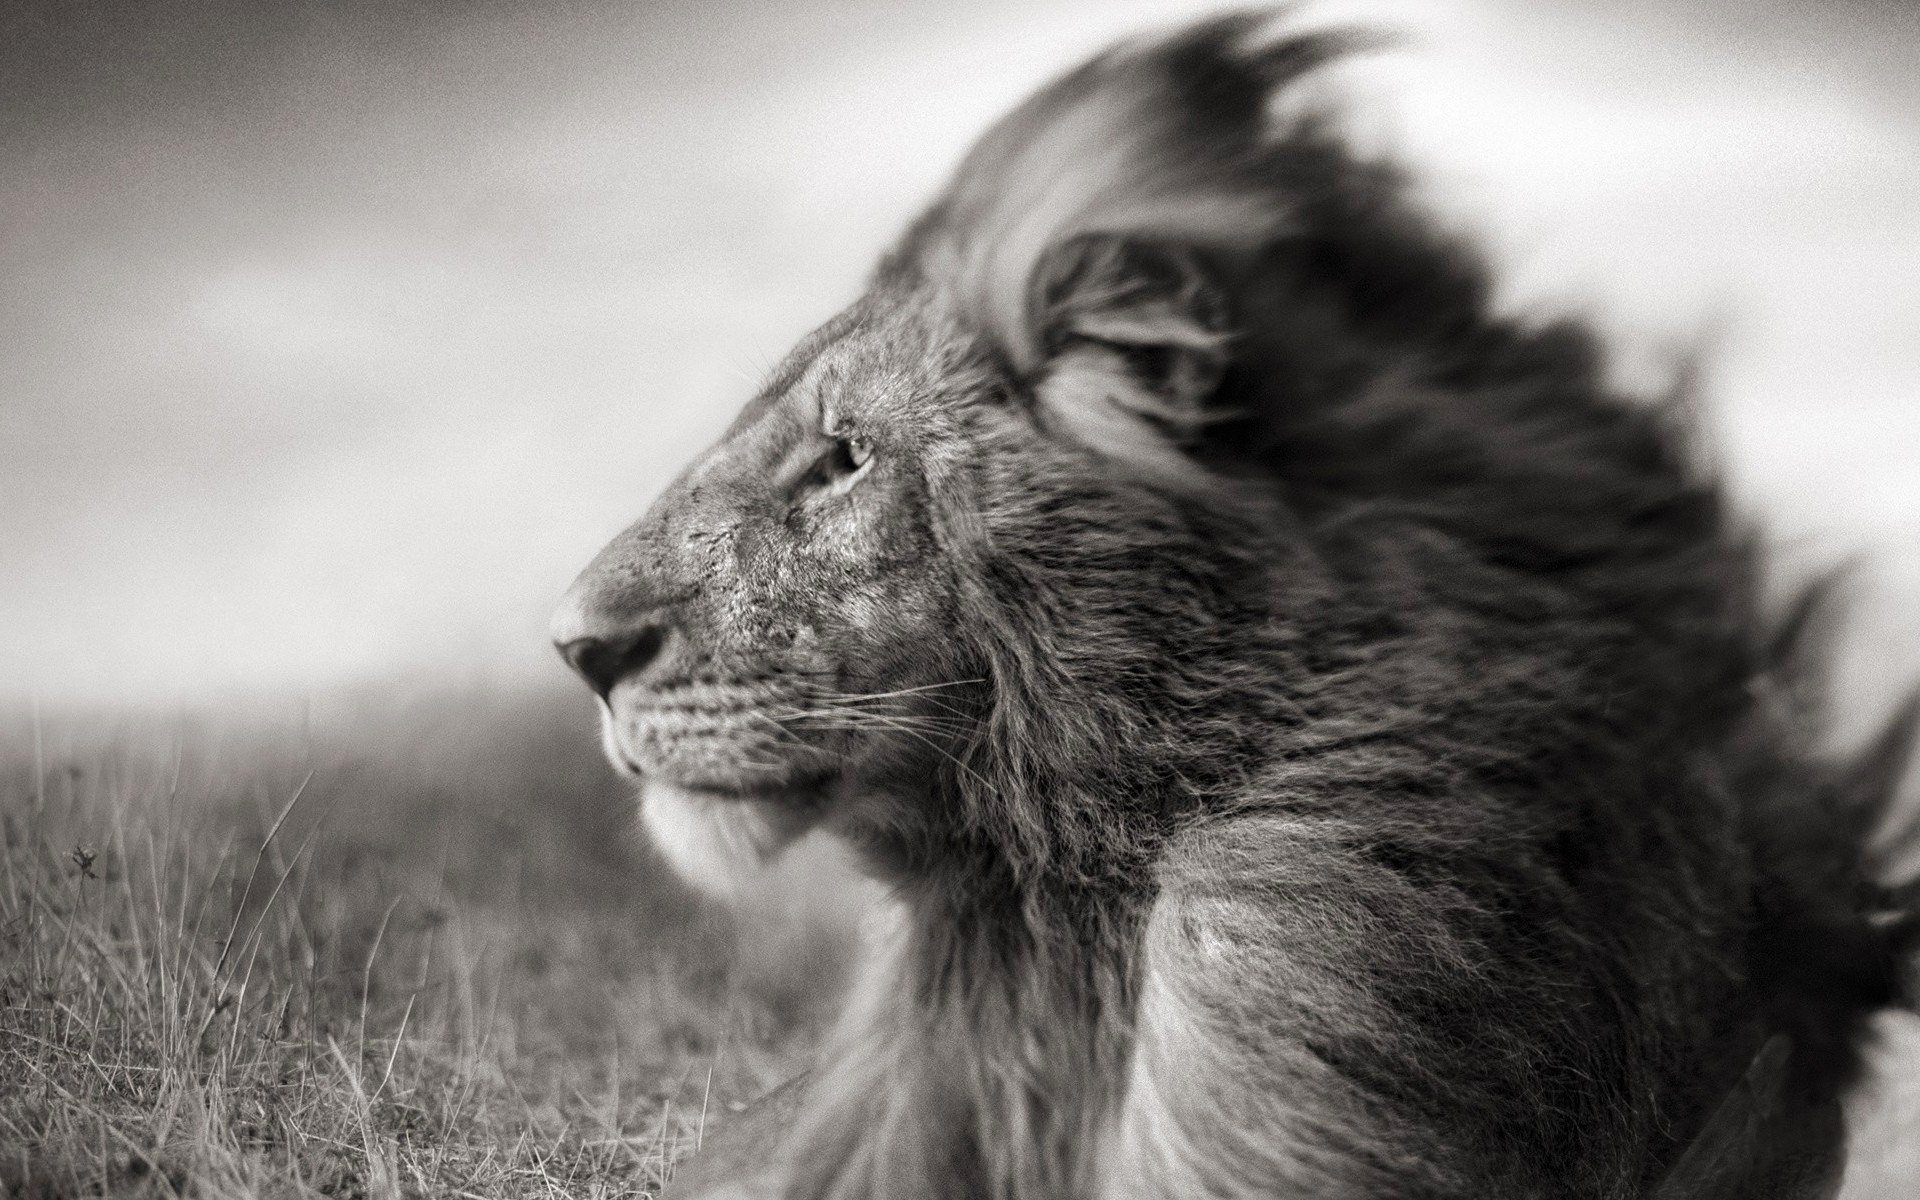 Portrait Of A Lion In Black And White Wallpaper for Desktop 1920x1200